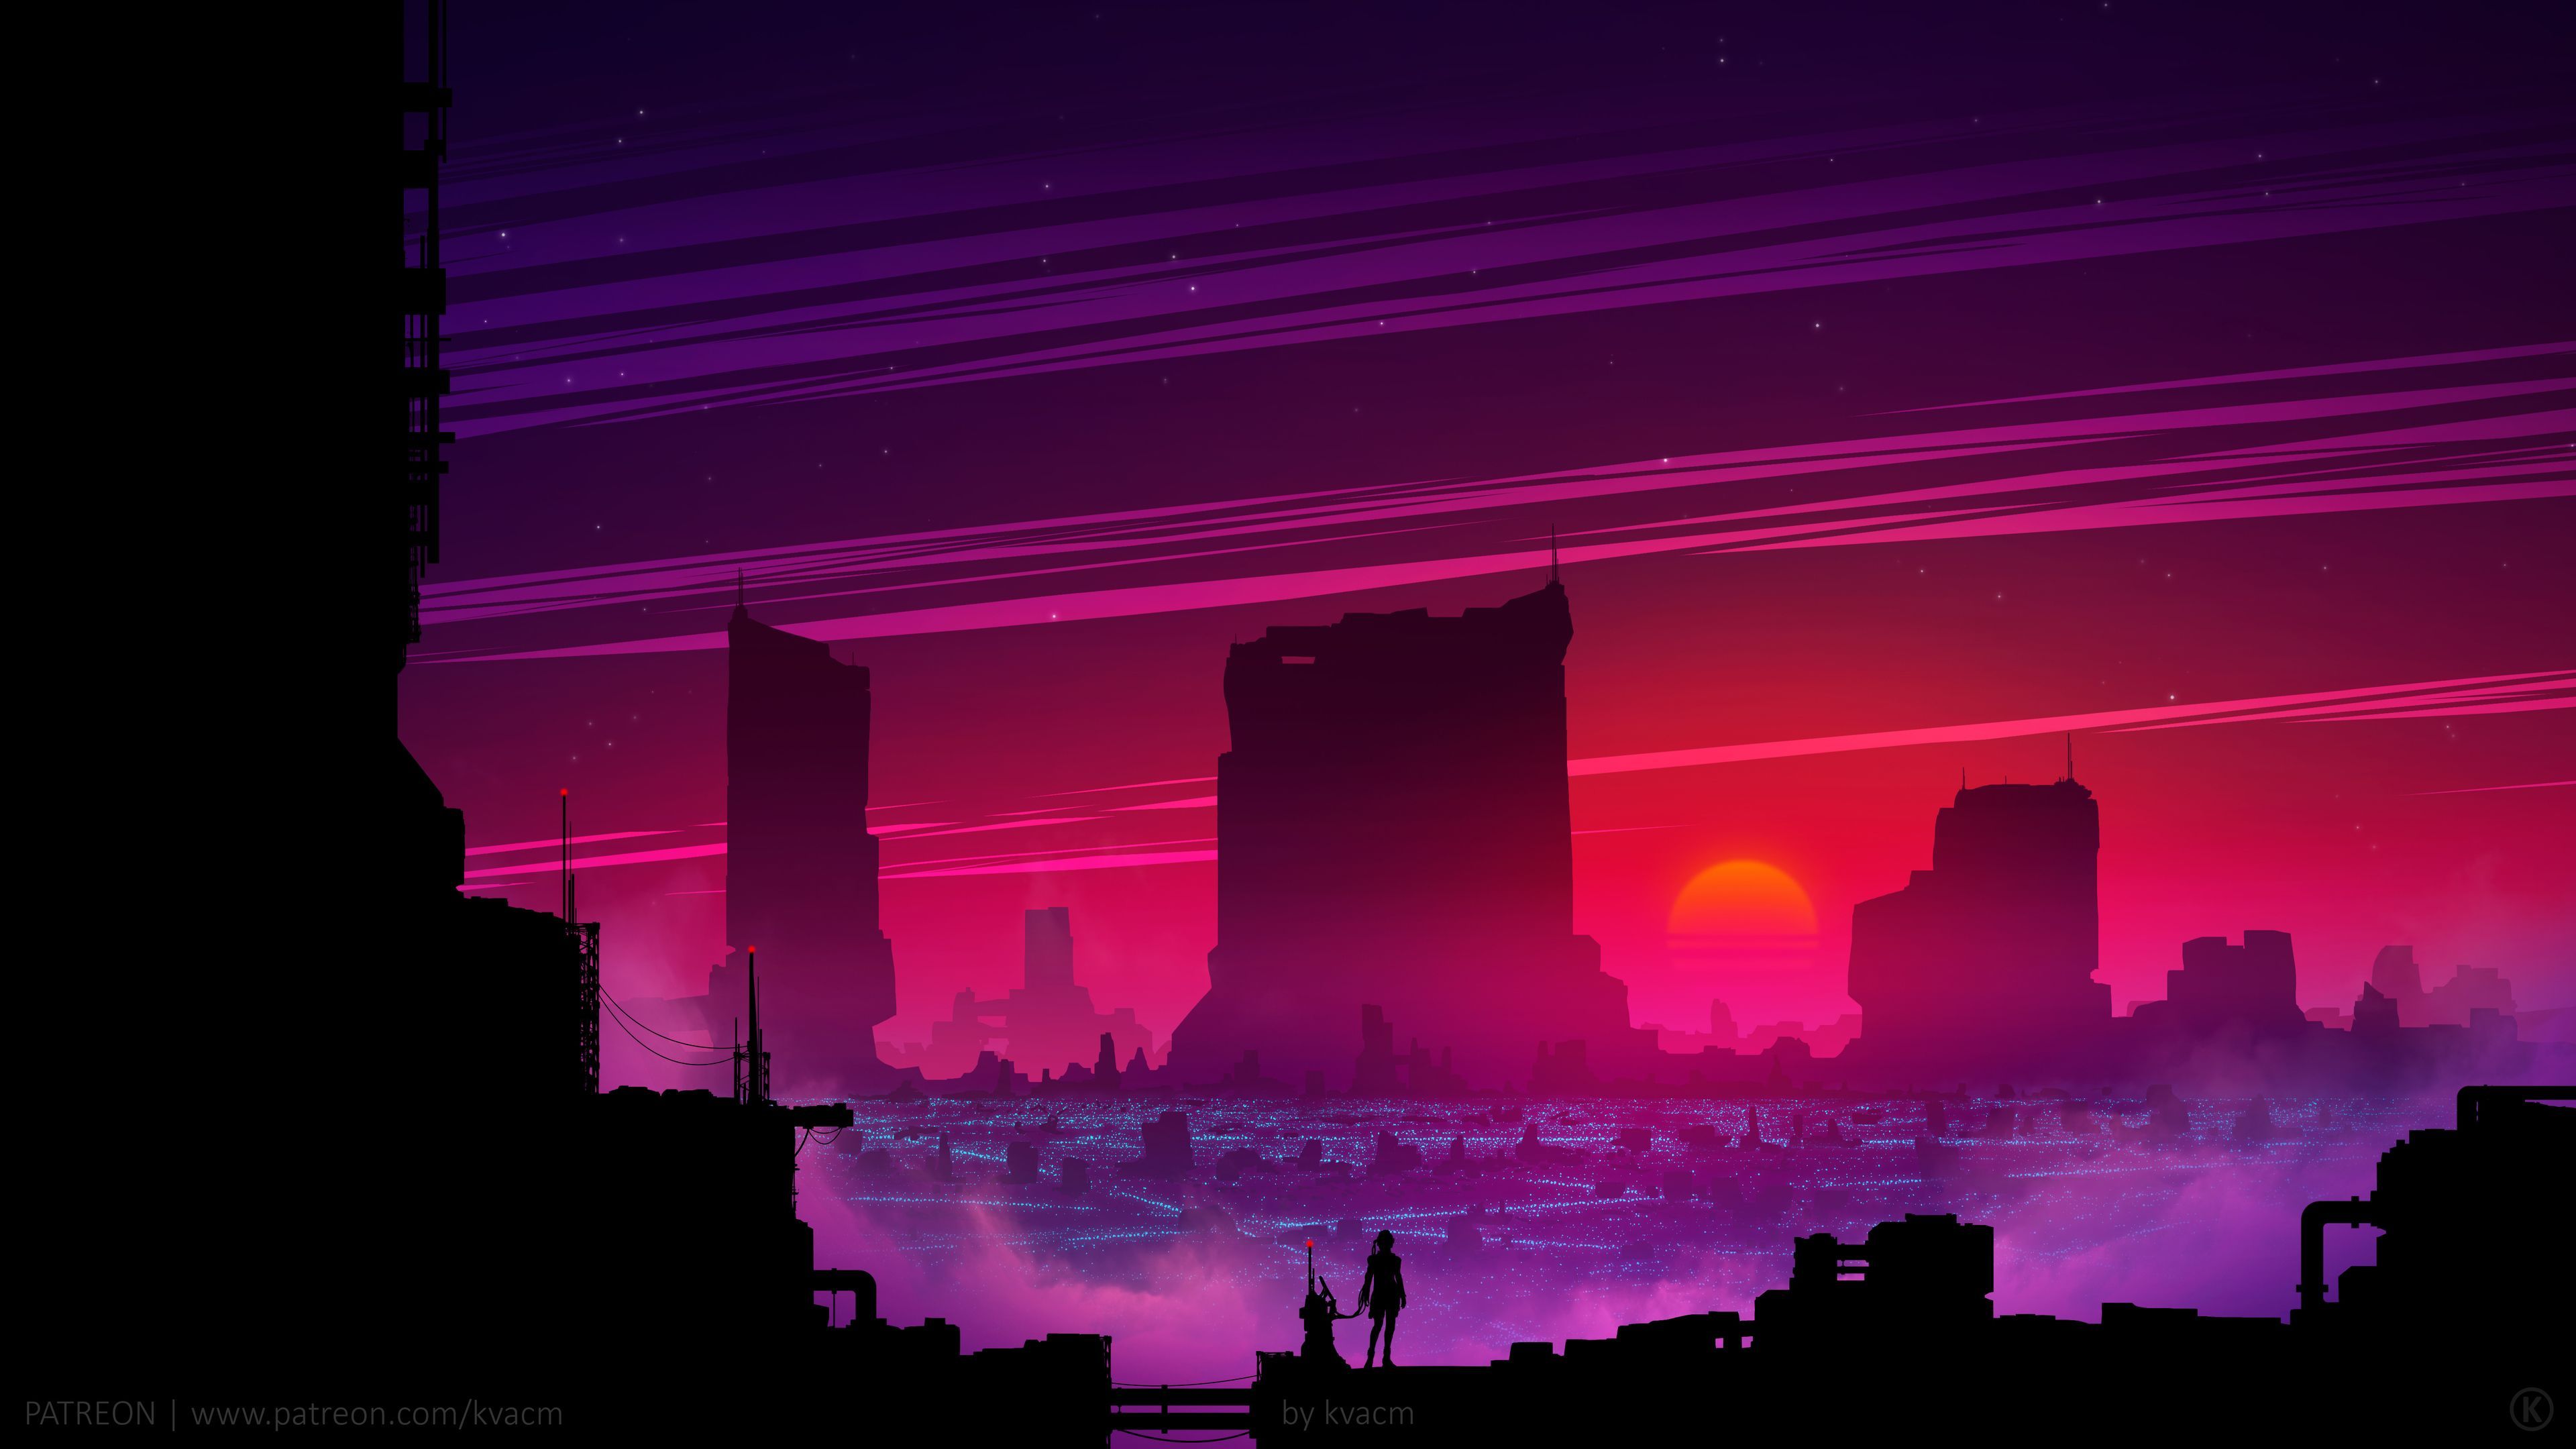 Synthwave Future Scifi 4k Synthwave Wallpaper, Scifi Wallpaper, Retrowave Wallpaper, Hd Wallpaper, Future Wall. Sunset City, Futuristic City, Future Wallpaper